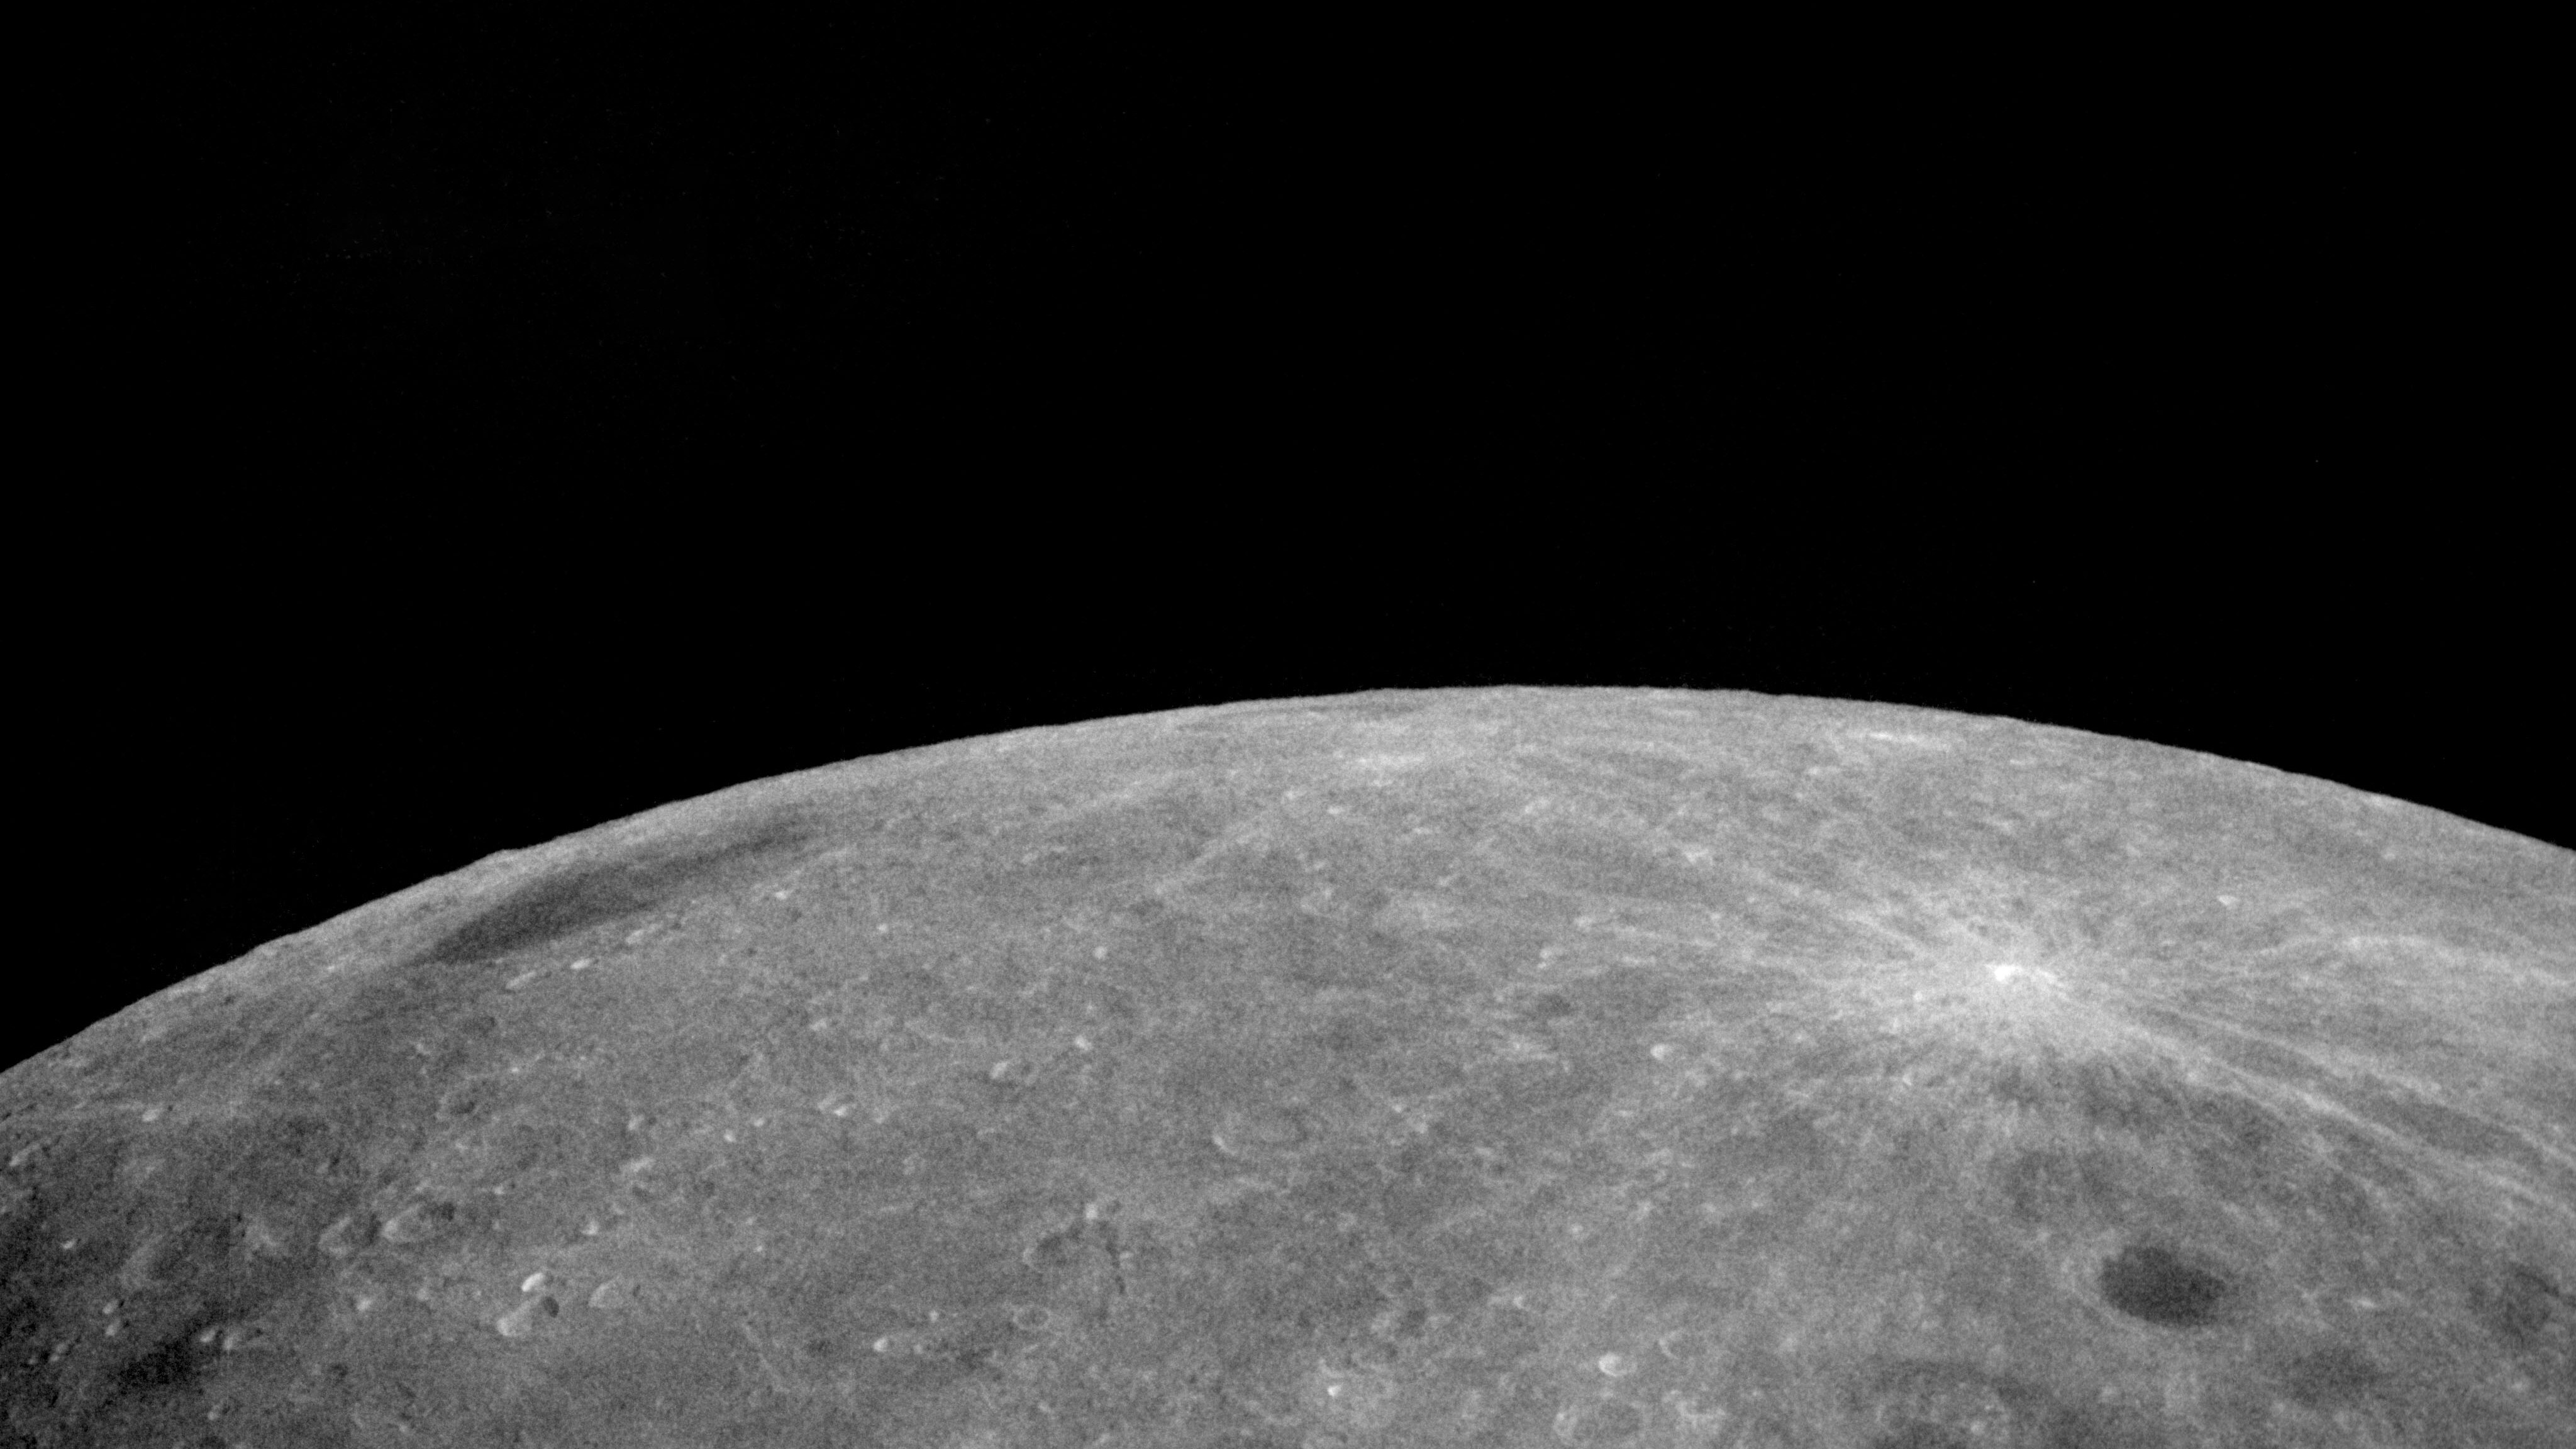 An extra moon may be orbiting Earth — and scientists think they know exactly where it came from